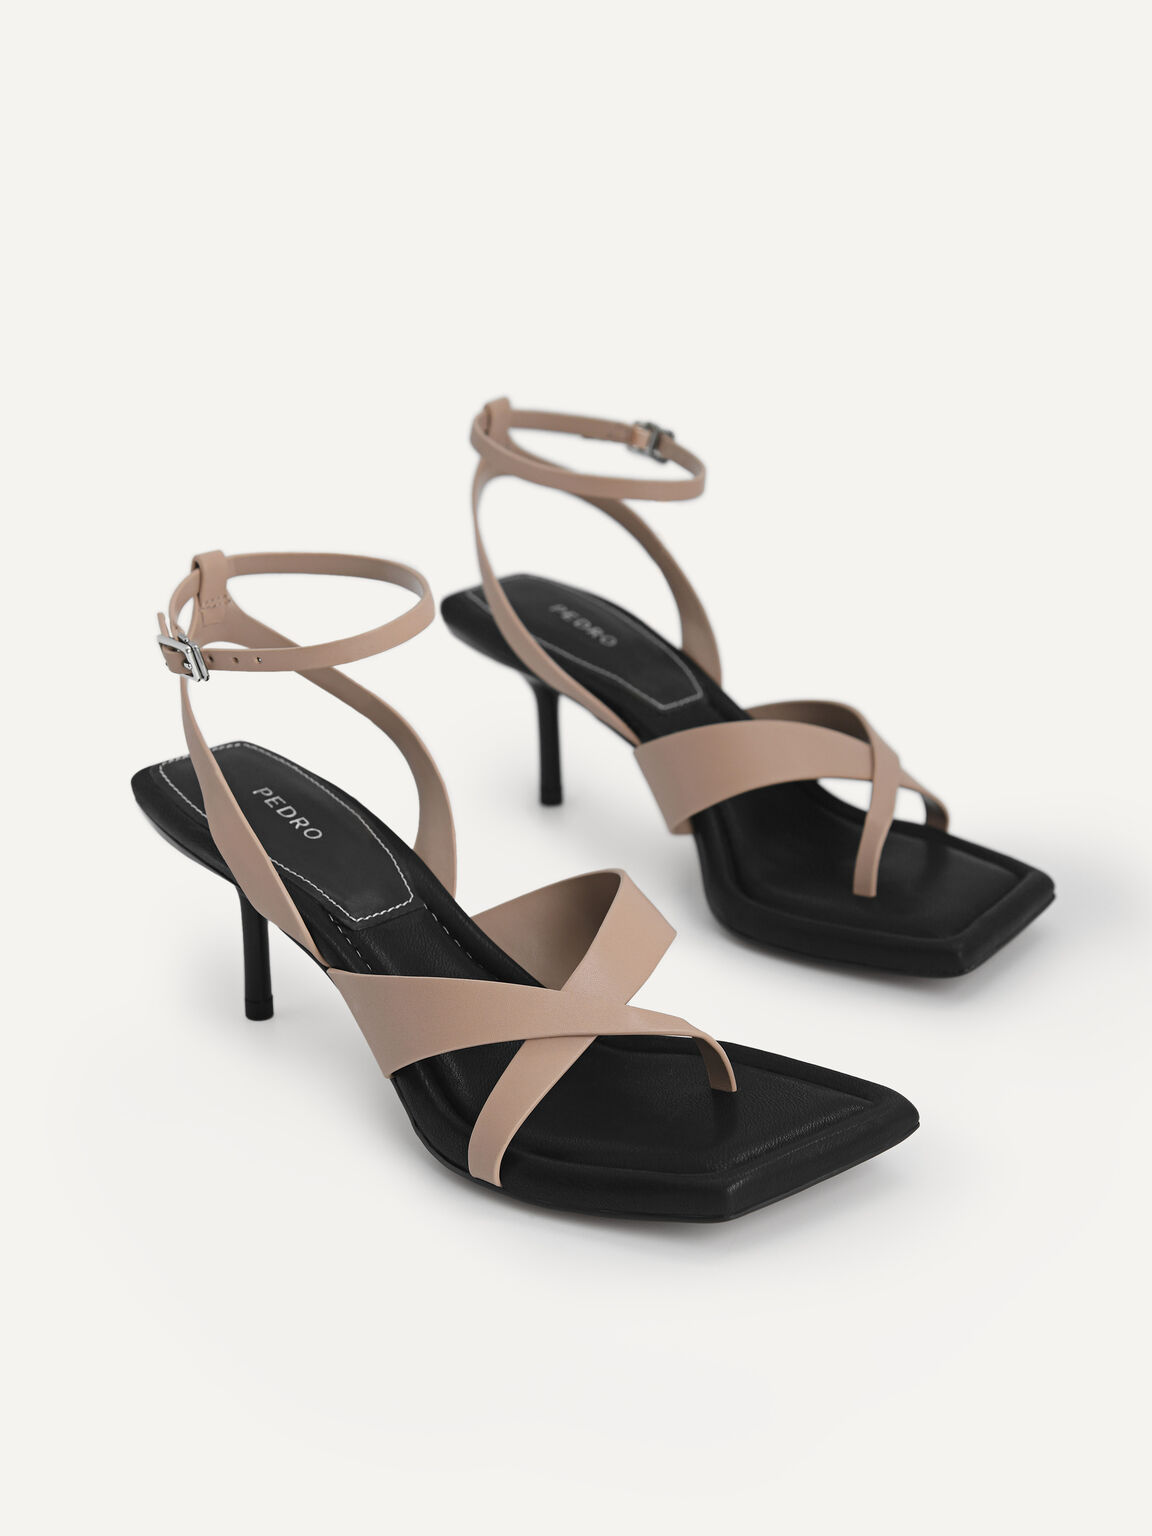 Strappy Square-Toe Heeled Sandals, Taupe